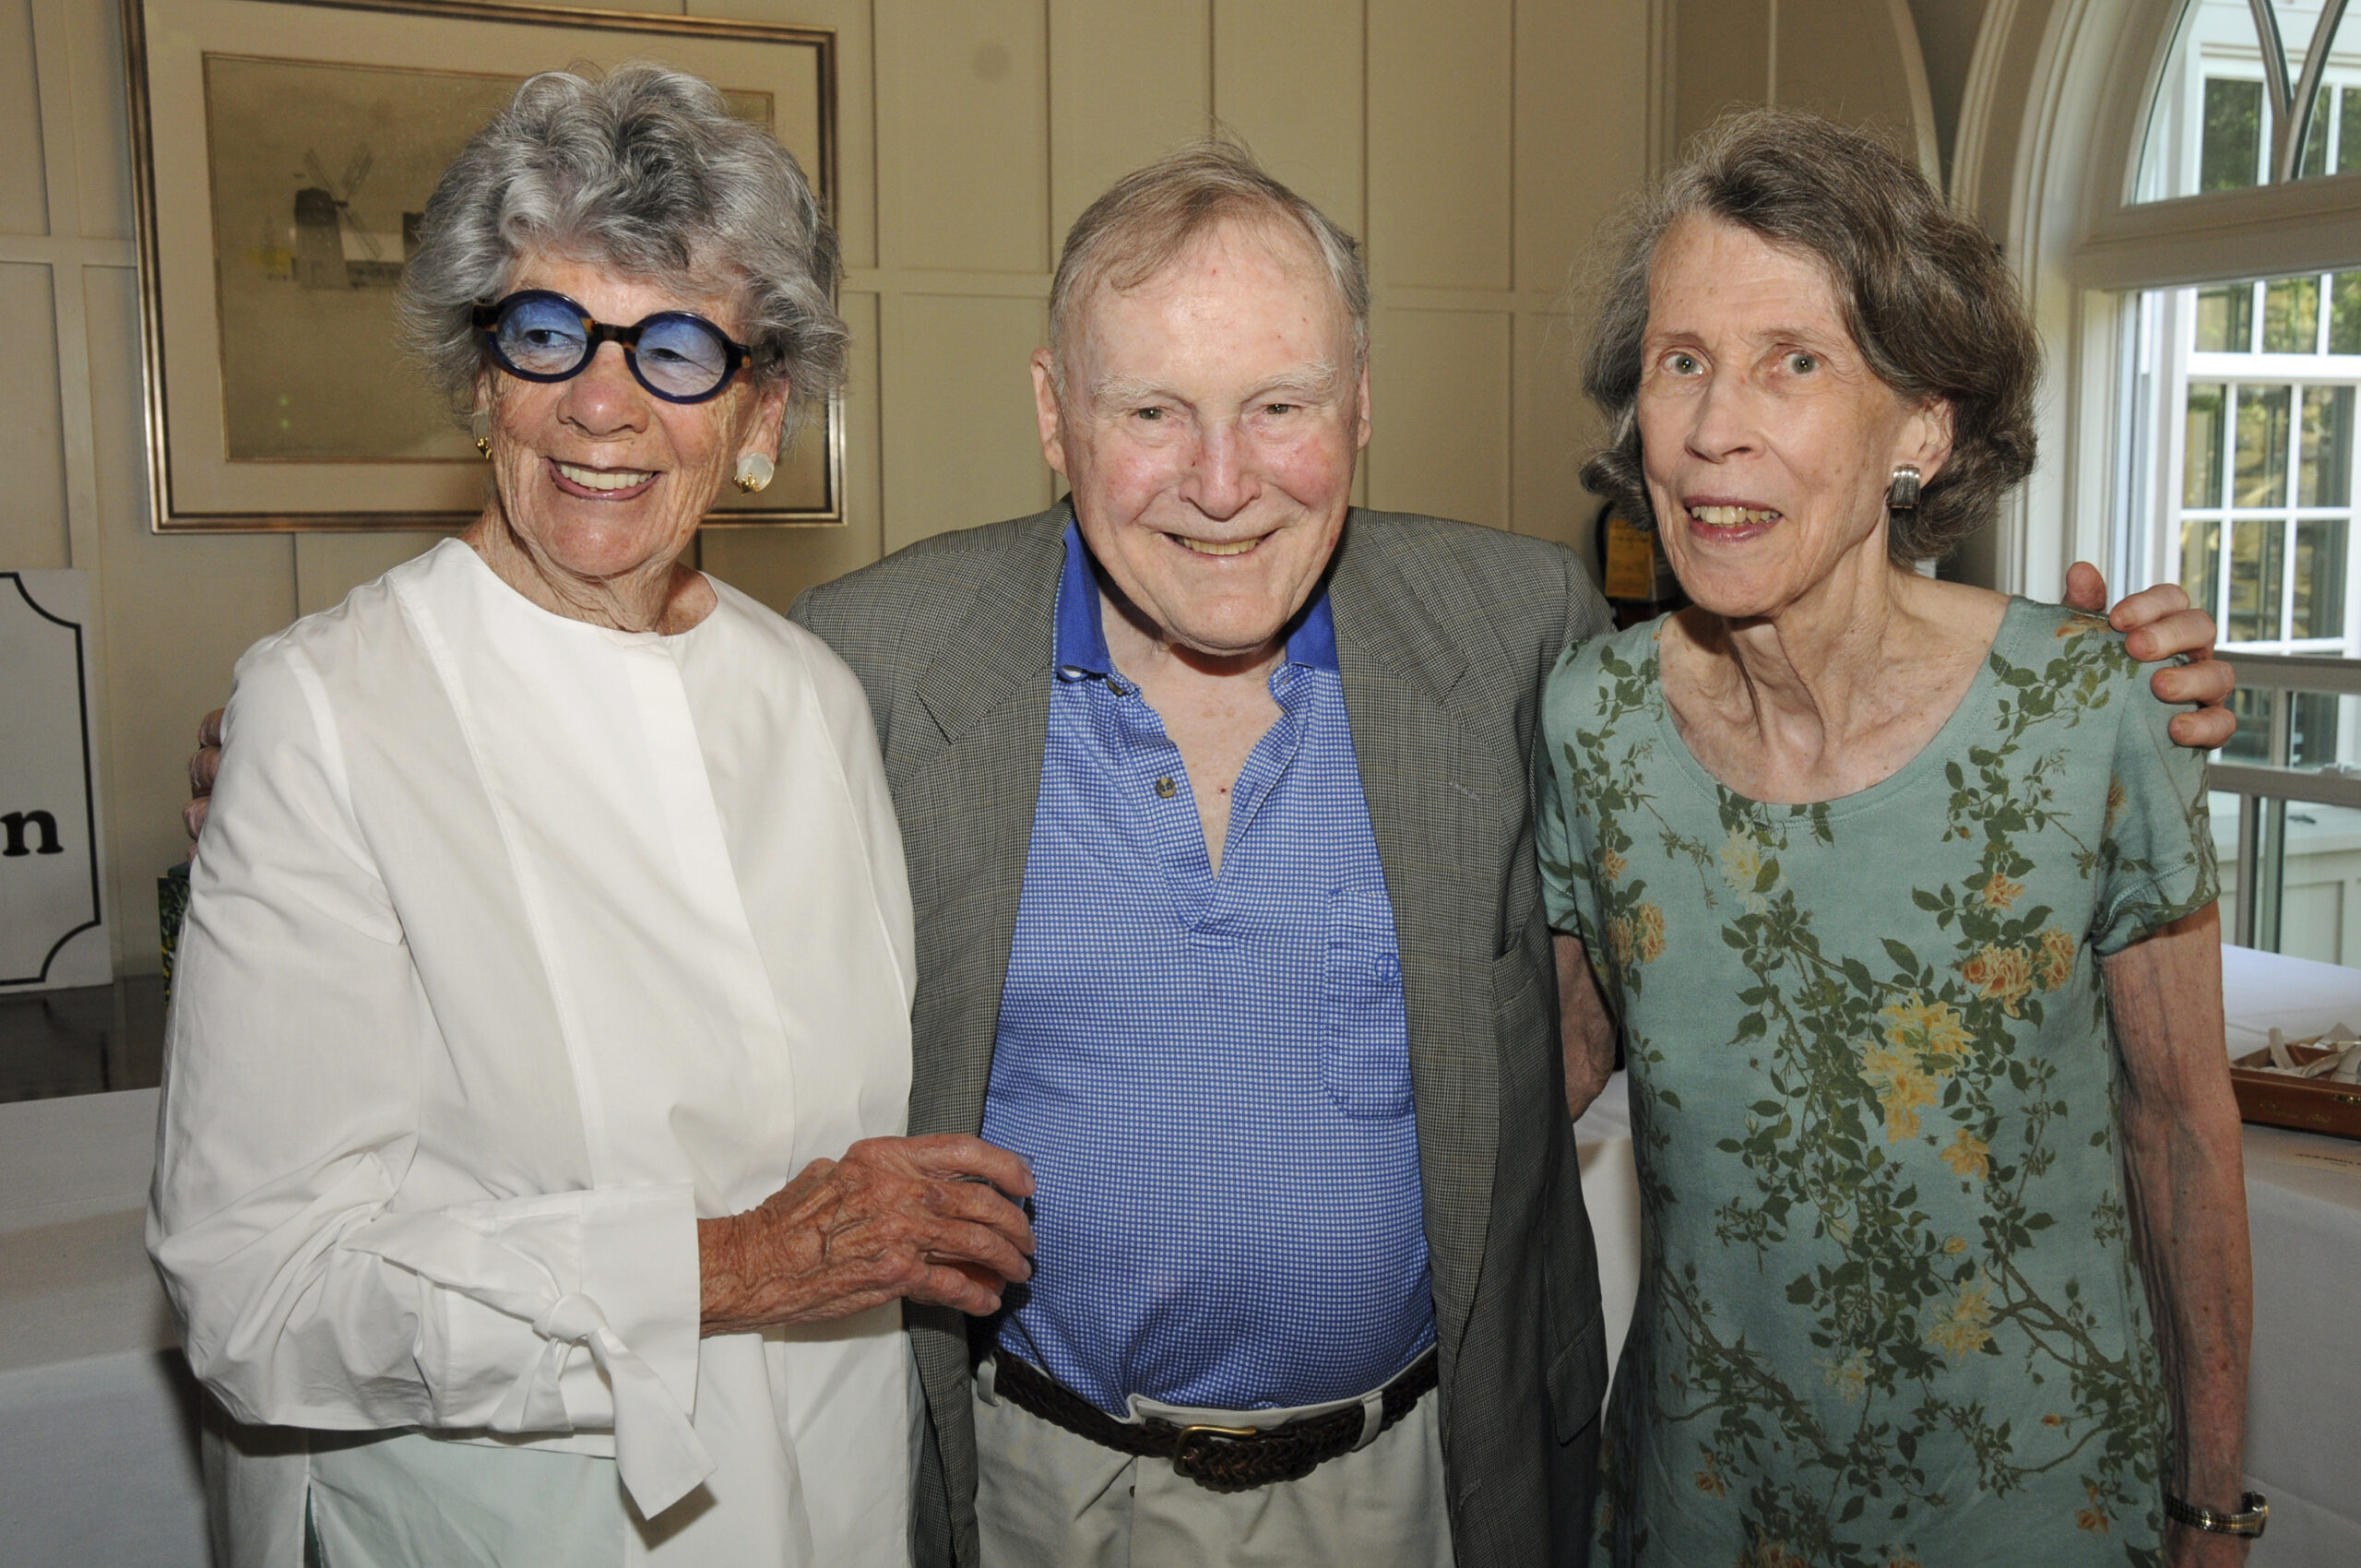 Anne McIlvaine with Ed and Grace Sutton at the East End Hospice 21st annual Box Art Auction preview reception on August 24 at Hoie Hall at St. Luke's Church in East Hampton . Dozens of local artists contributed their vision and creation of 